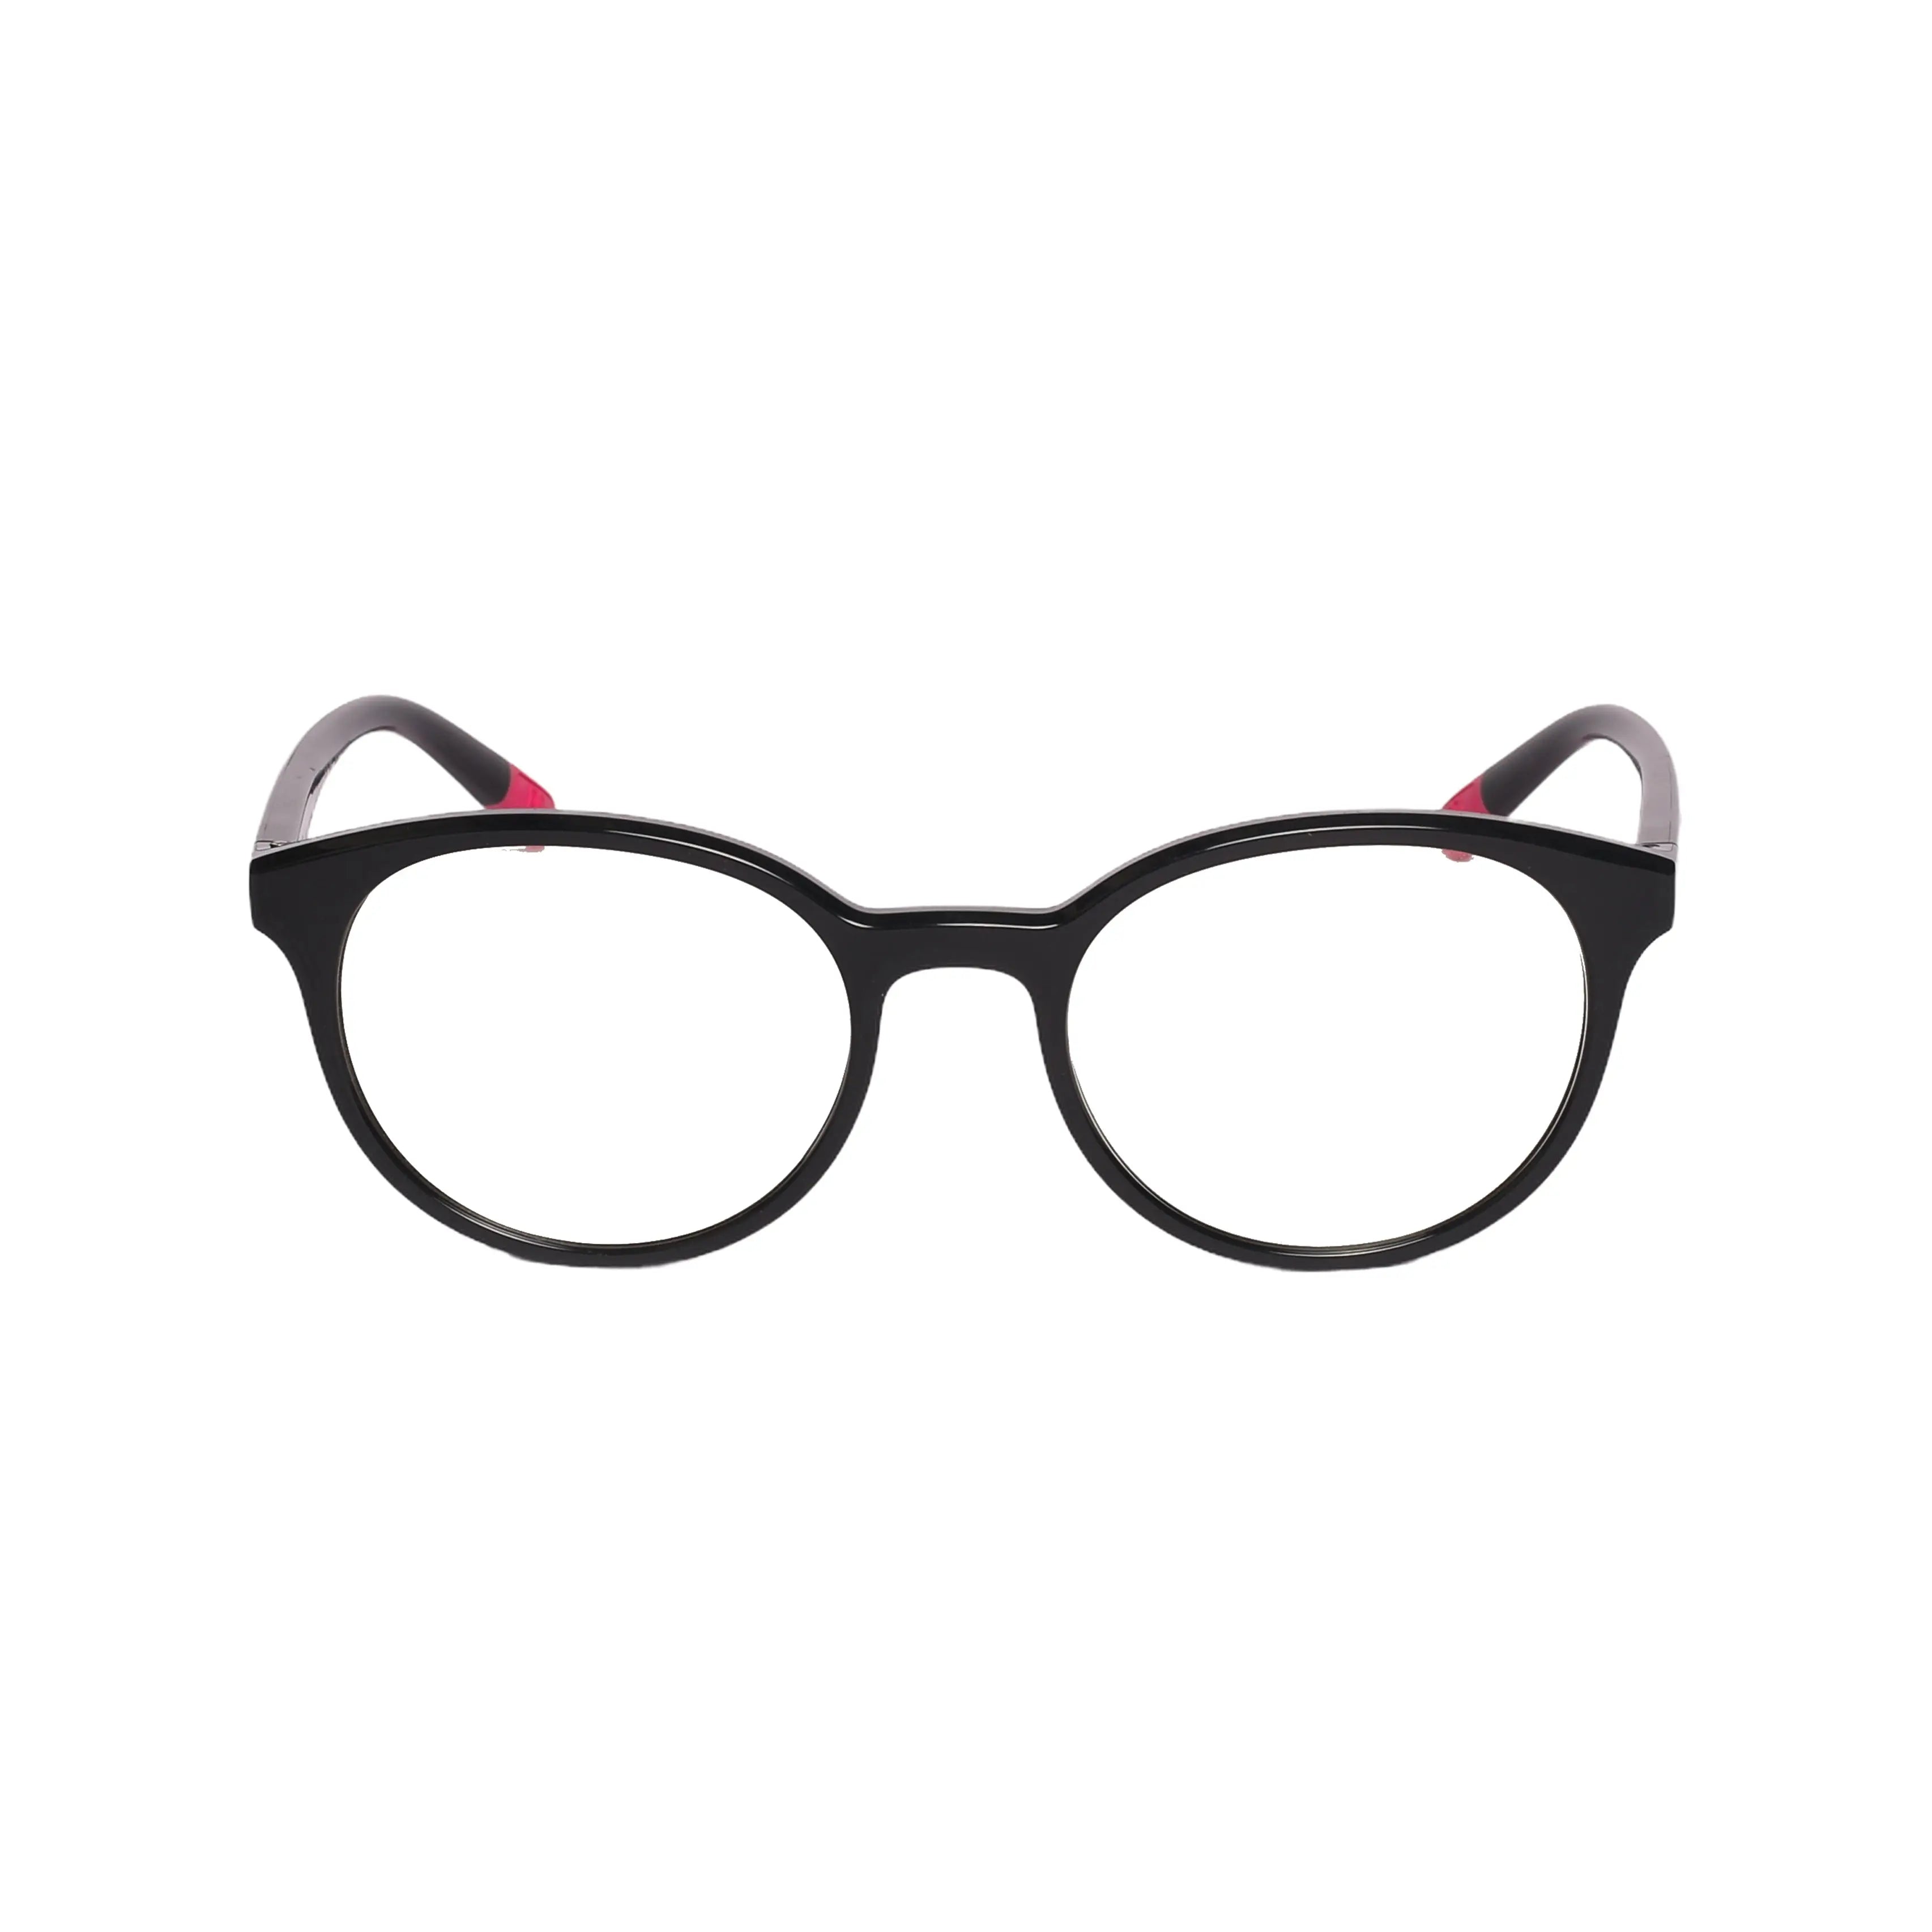 Dolce & Gabbana (D&G) DG 5093-51-501 EyeglassesRediscover the world in vivid color and clarity with these Dolce &amp; Gabbana (D&amp;G) DG 5093-51-501 Eyeglasses. The classic yet modern design offers a timeless, Eyeglasses